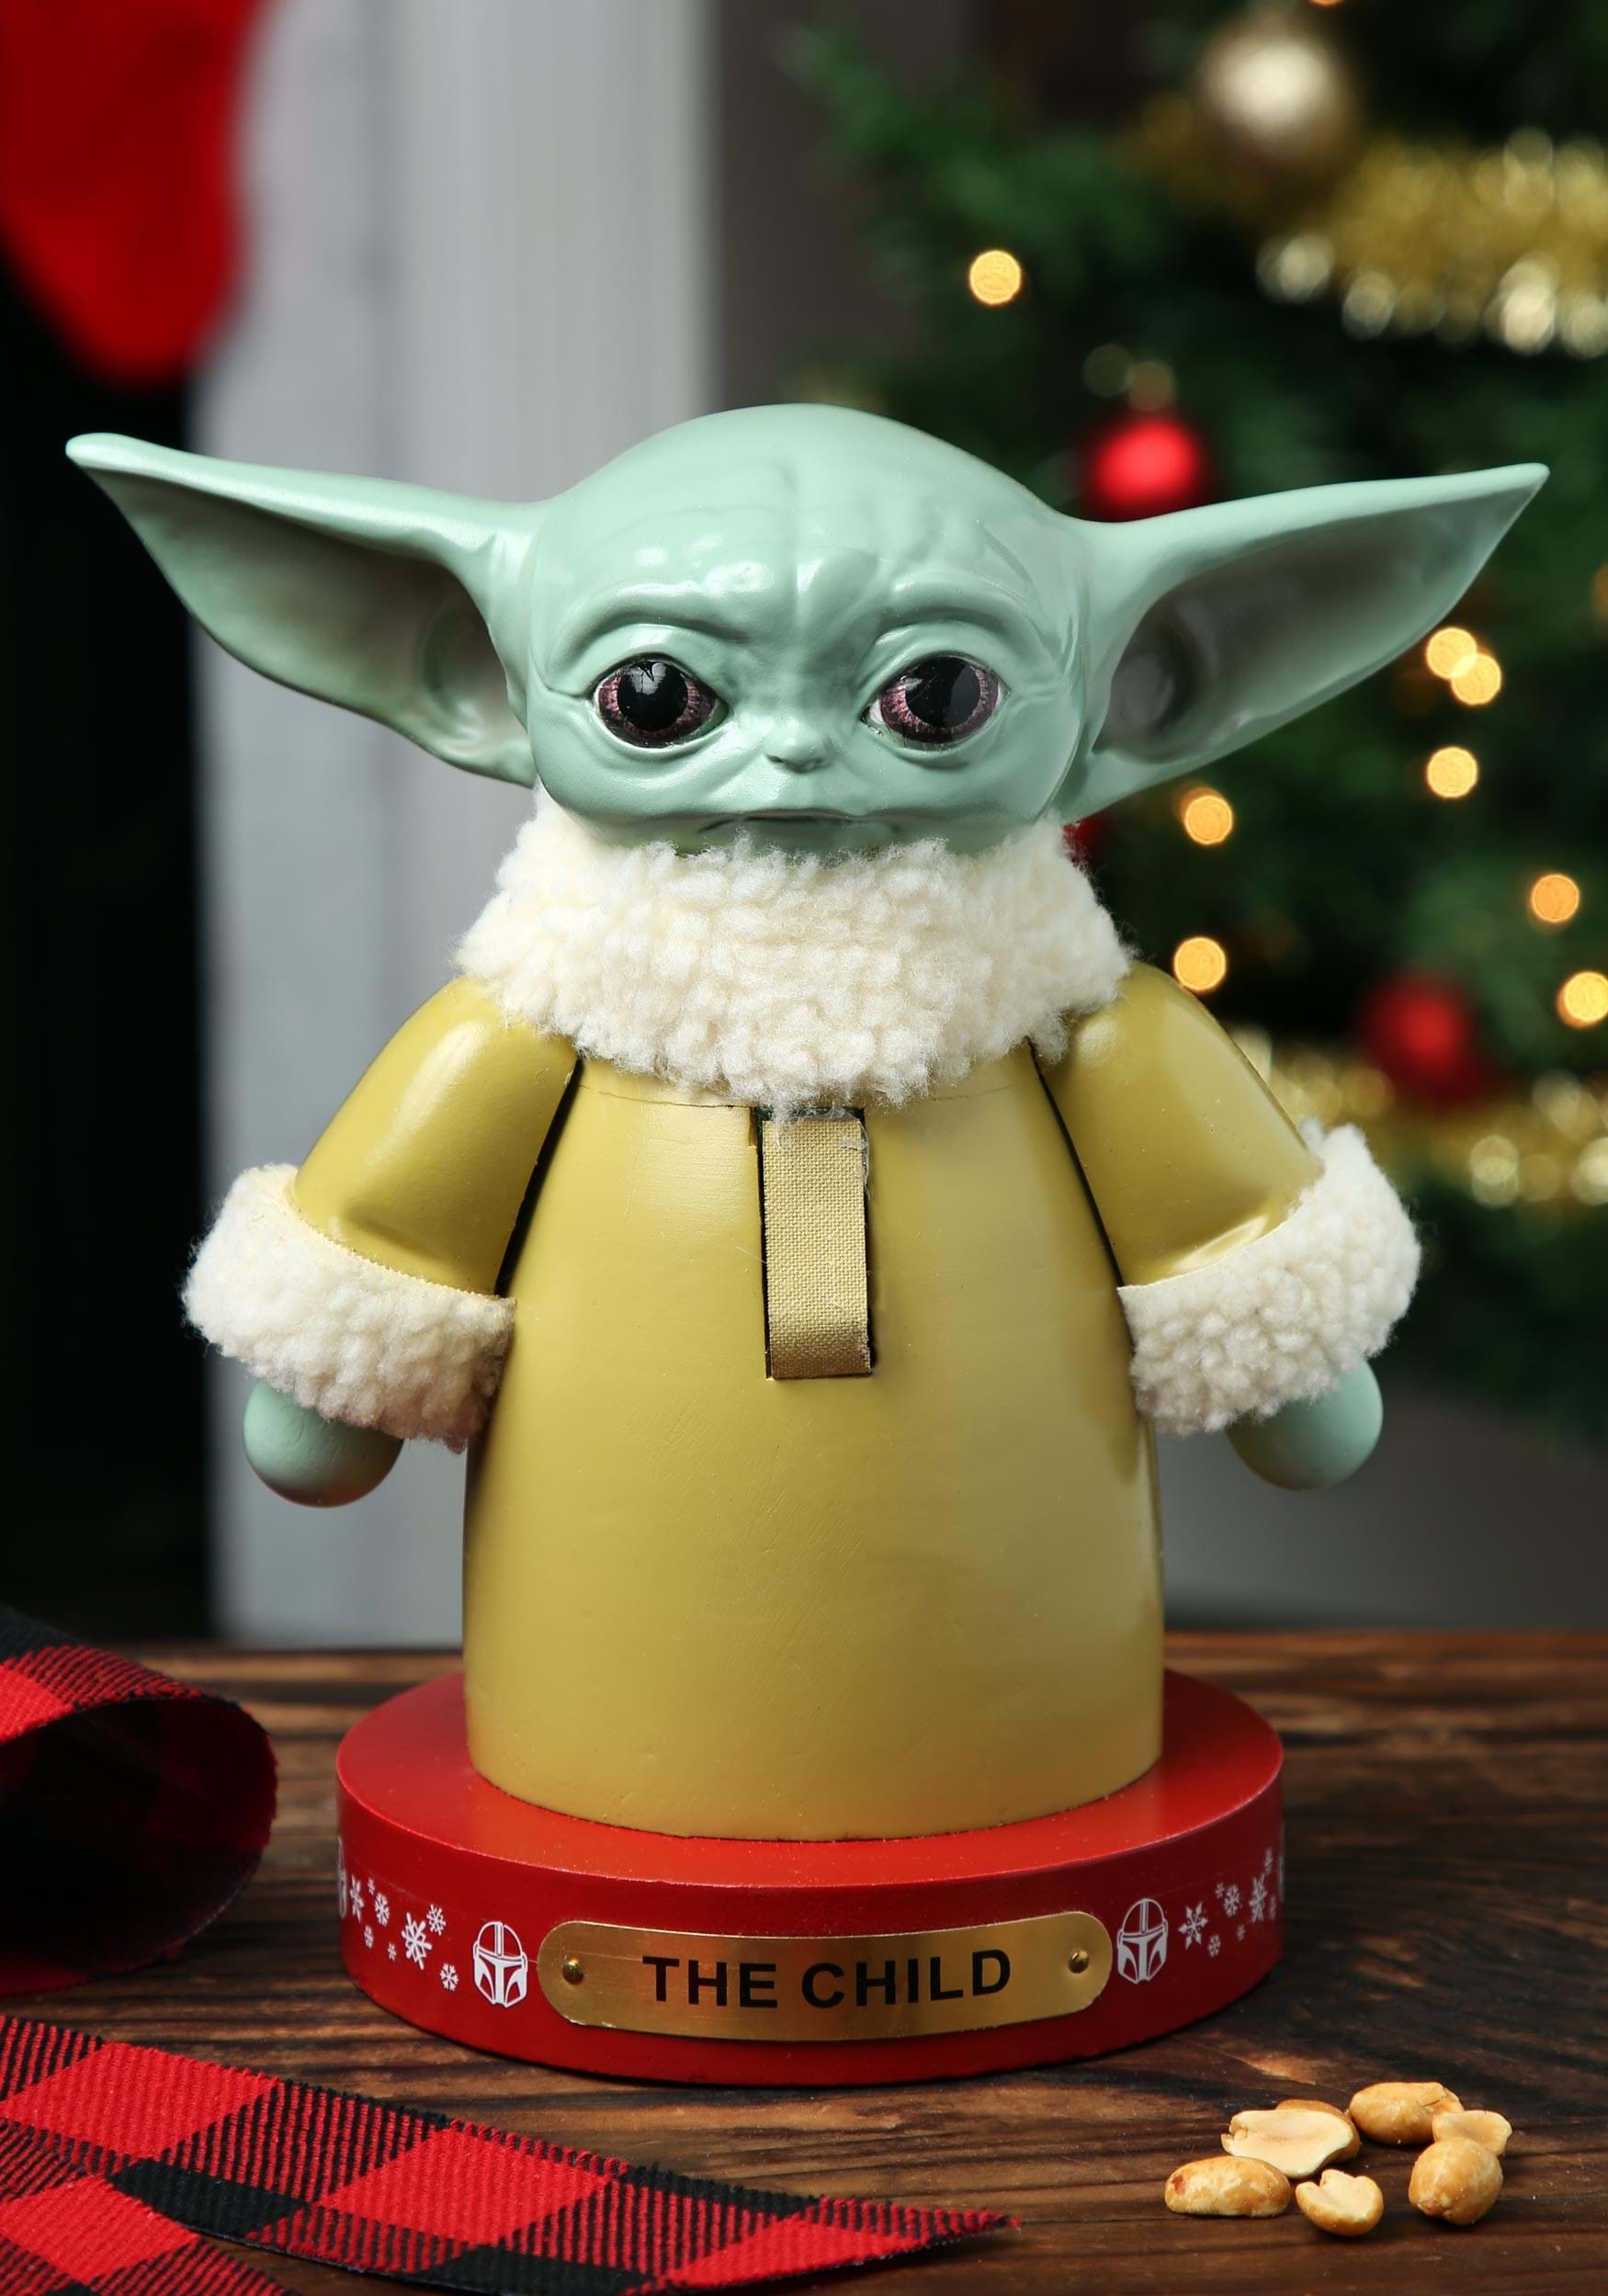 Yoda Mandalorian Baby What Child Is This Christmas Ornament Star Wars 